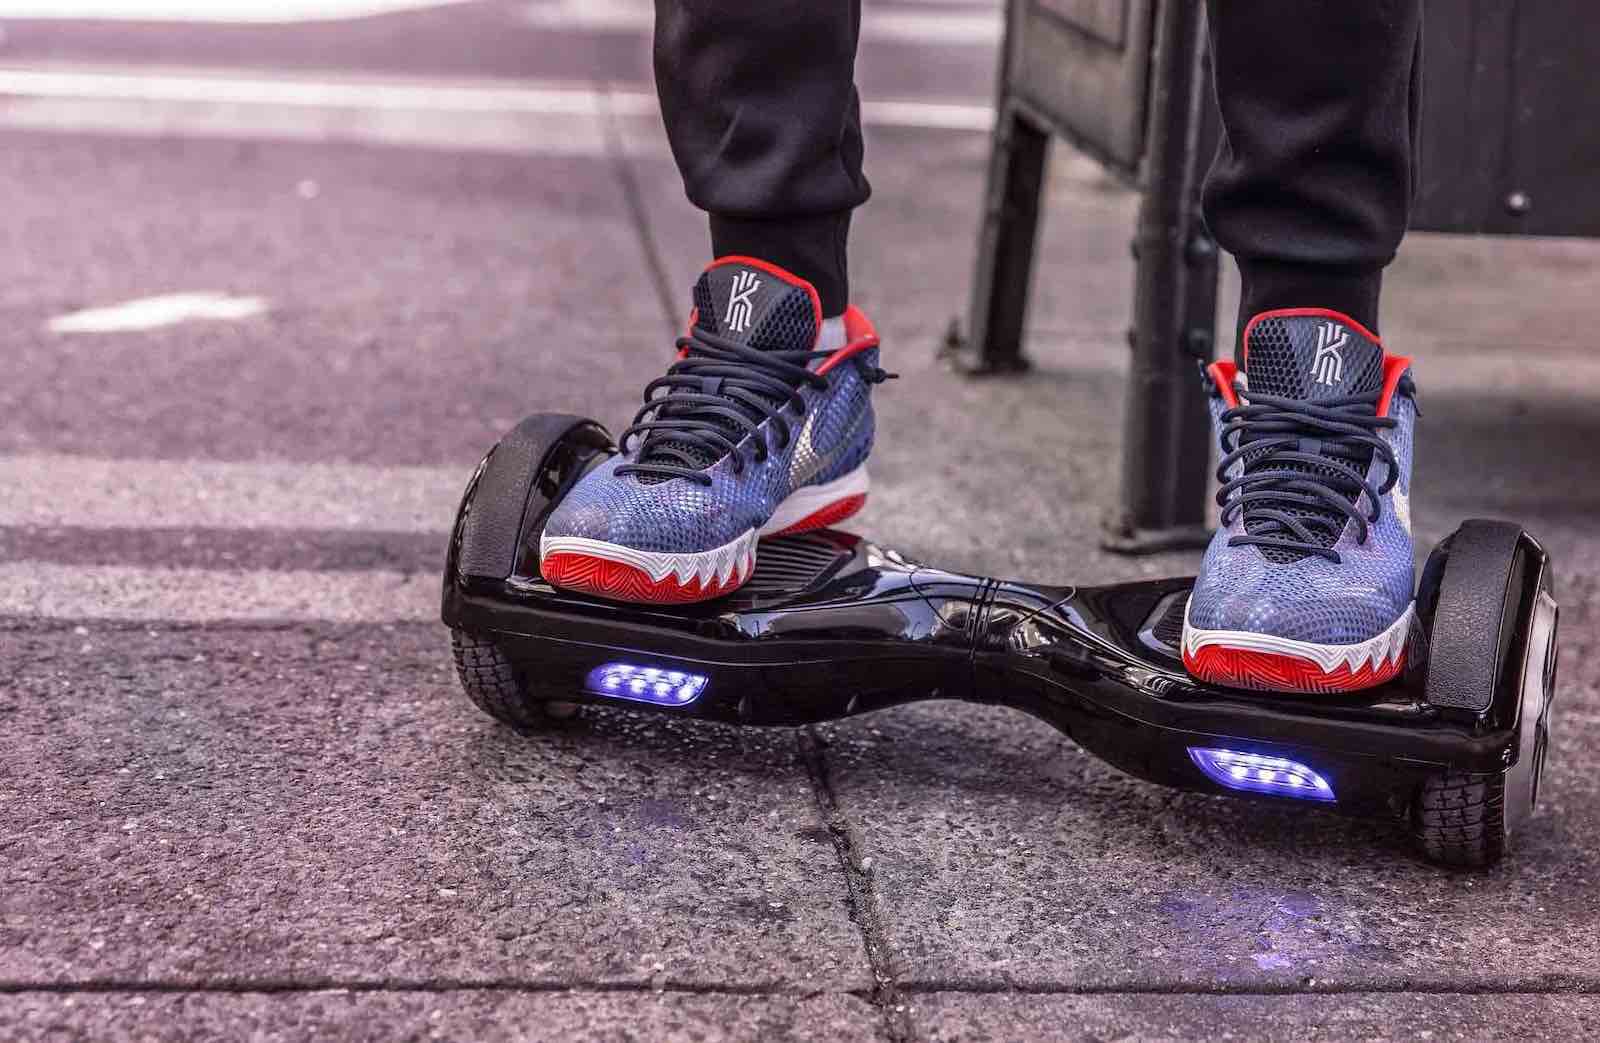 classic hoverboard